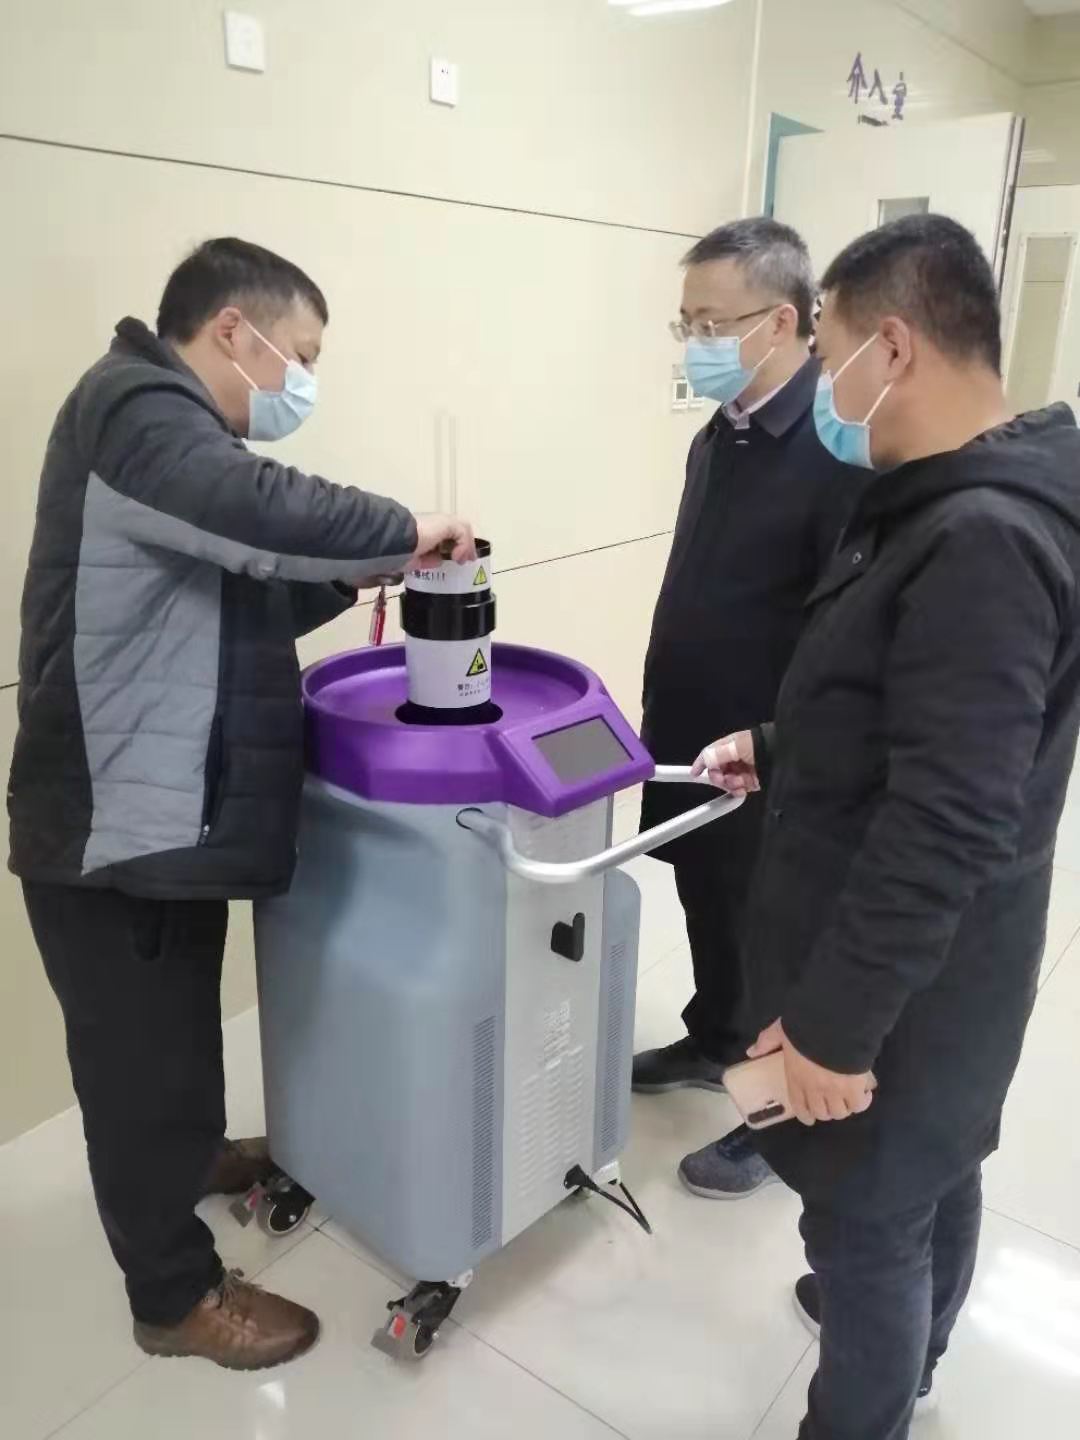 Using UV Light Sterilizer for Disinfection During Covid-19